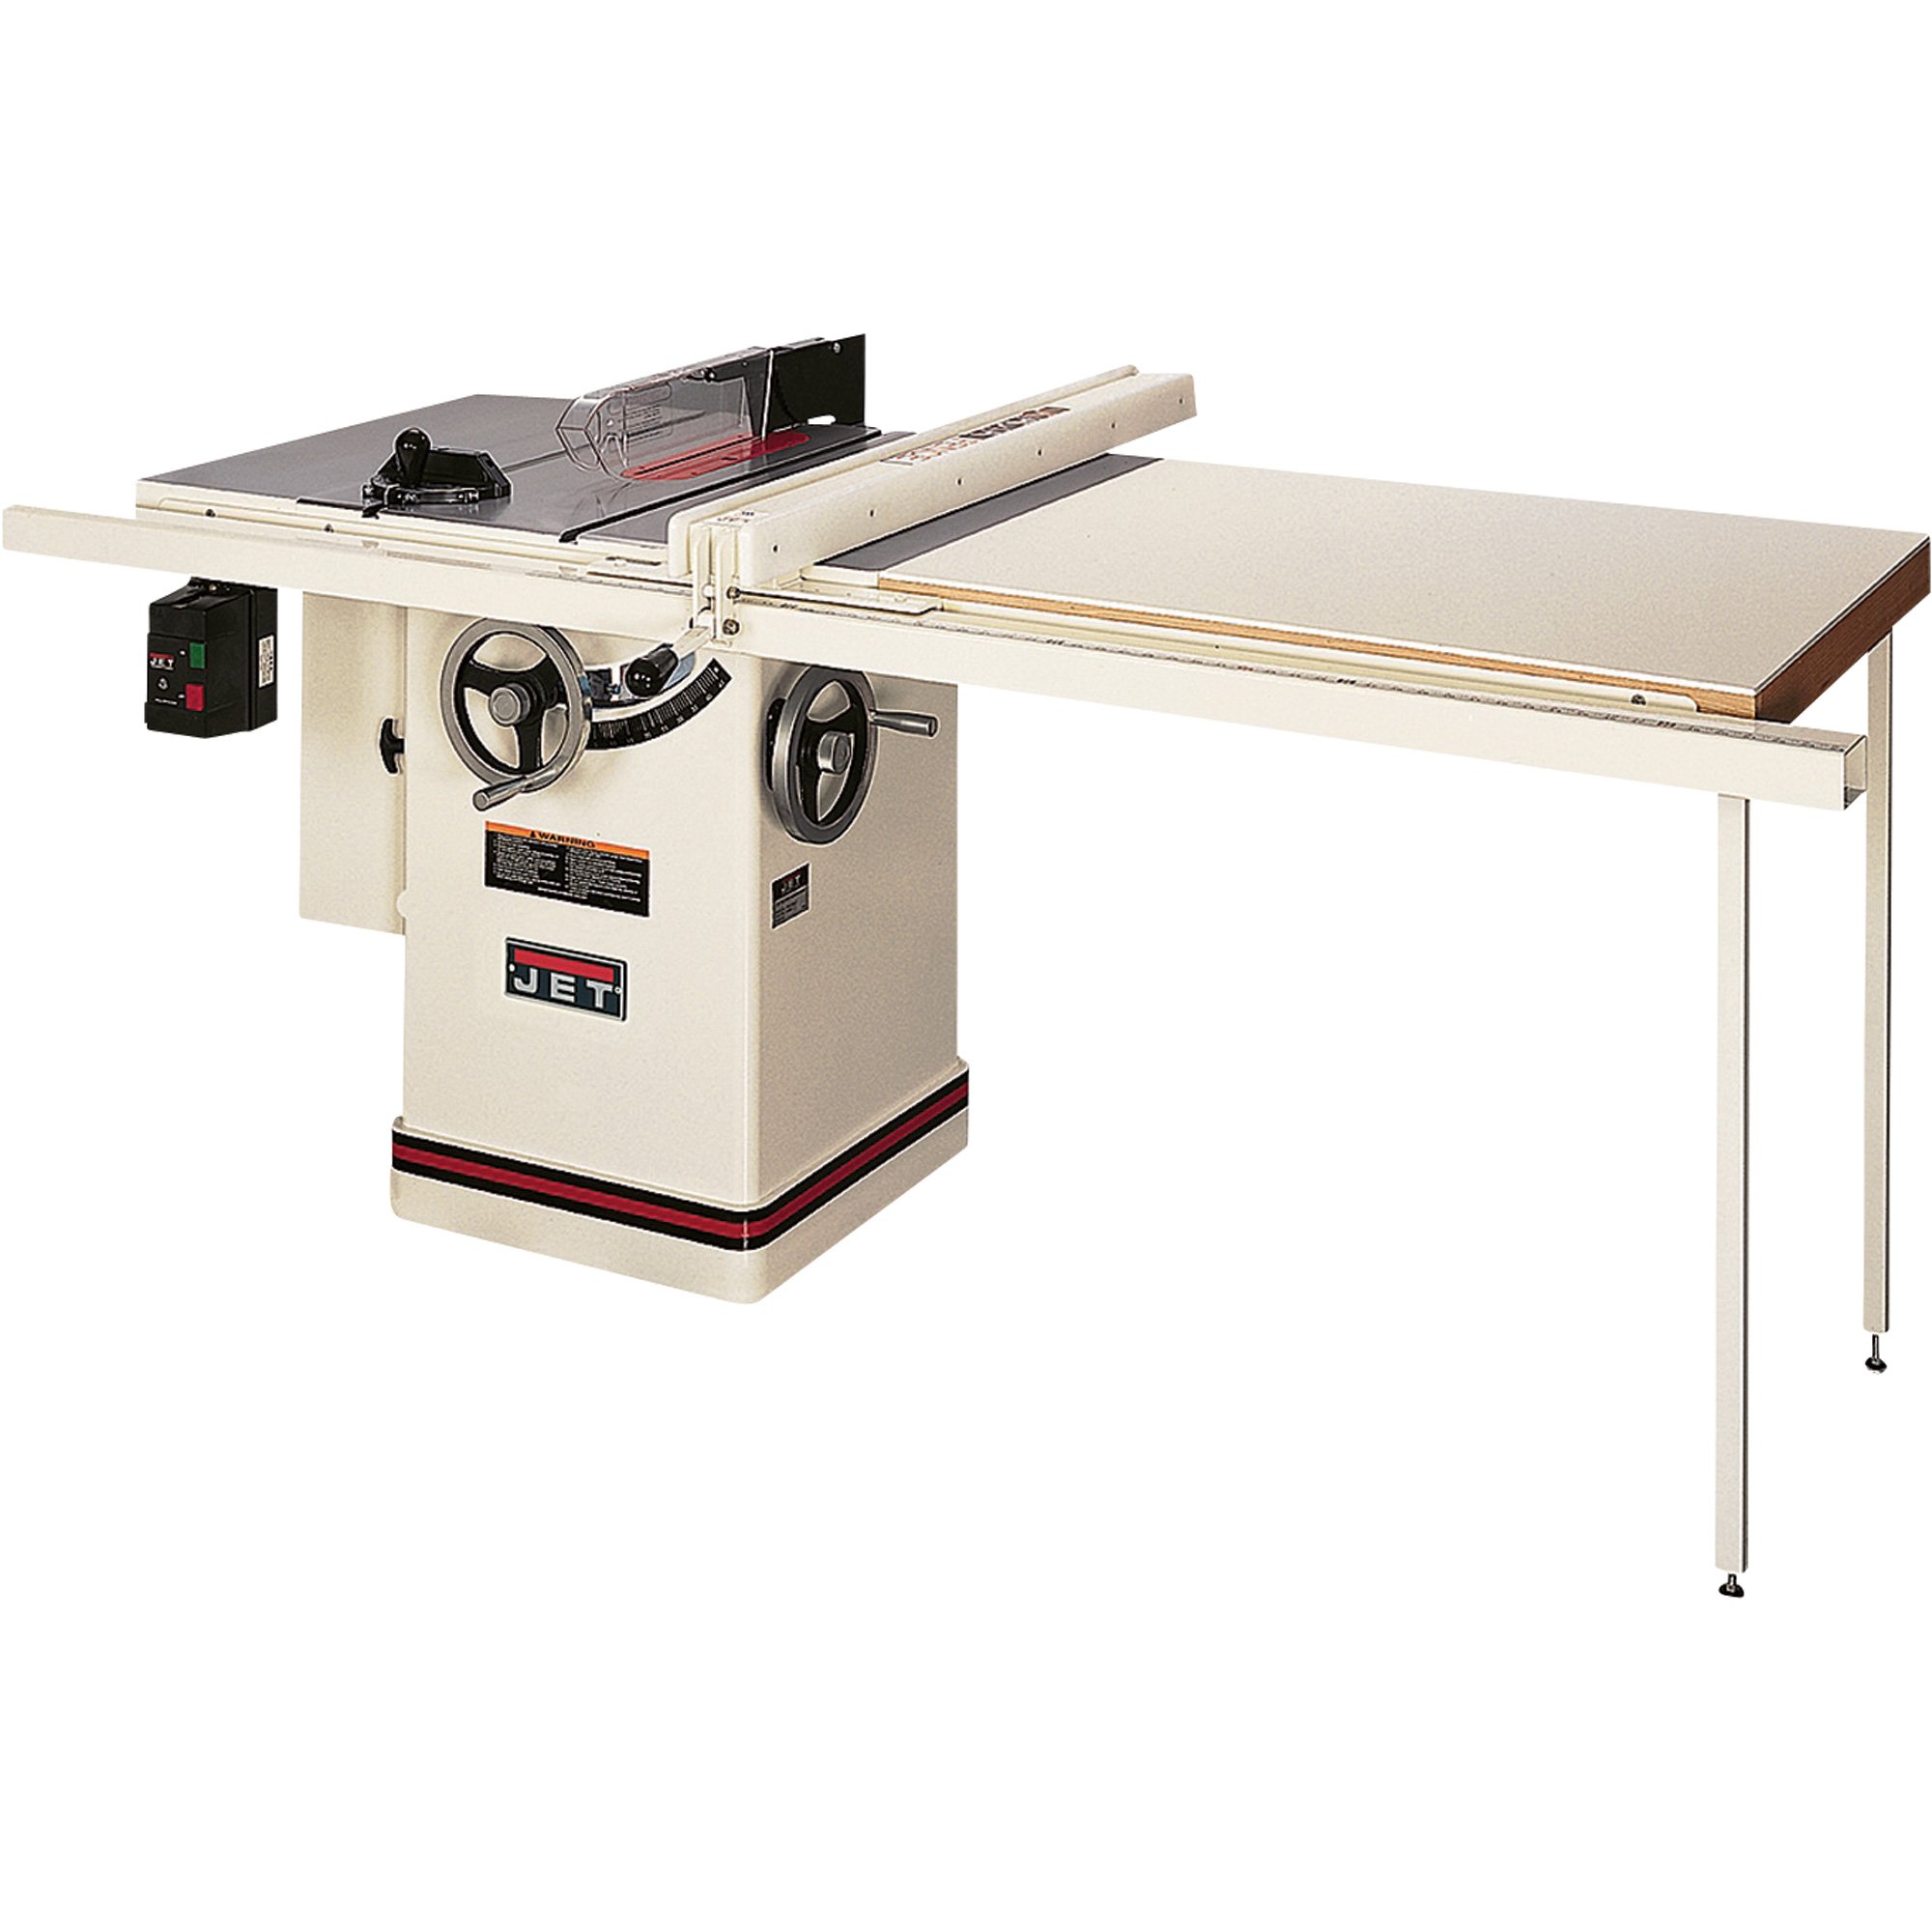 Jet Xactasaw Table Saw 10in Model